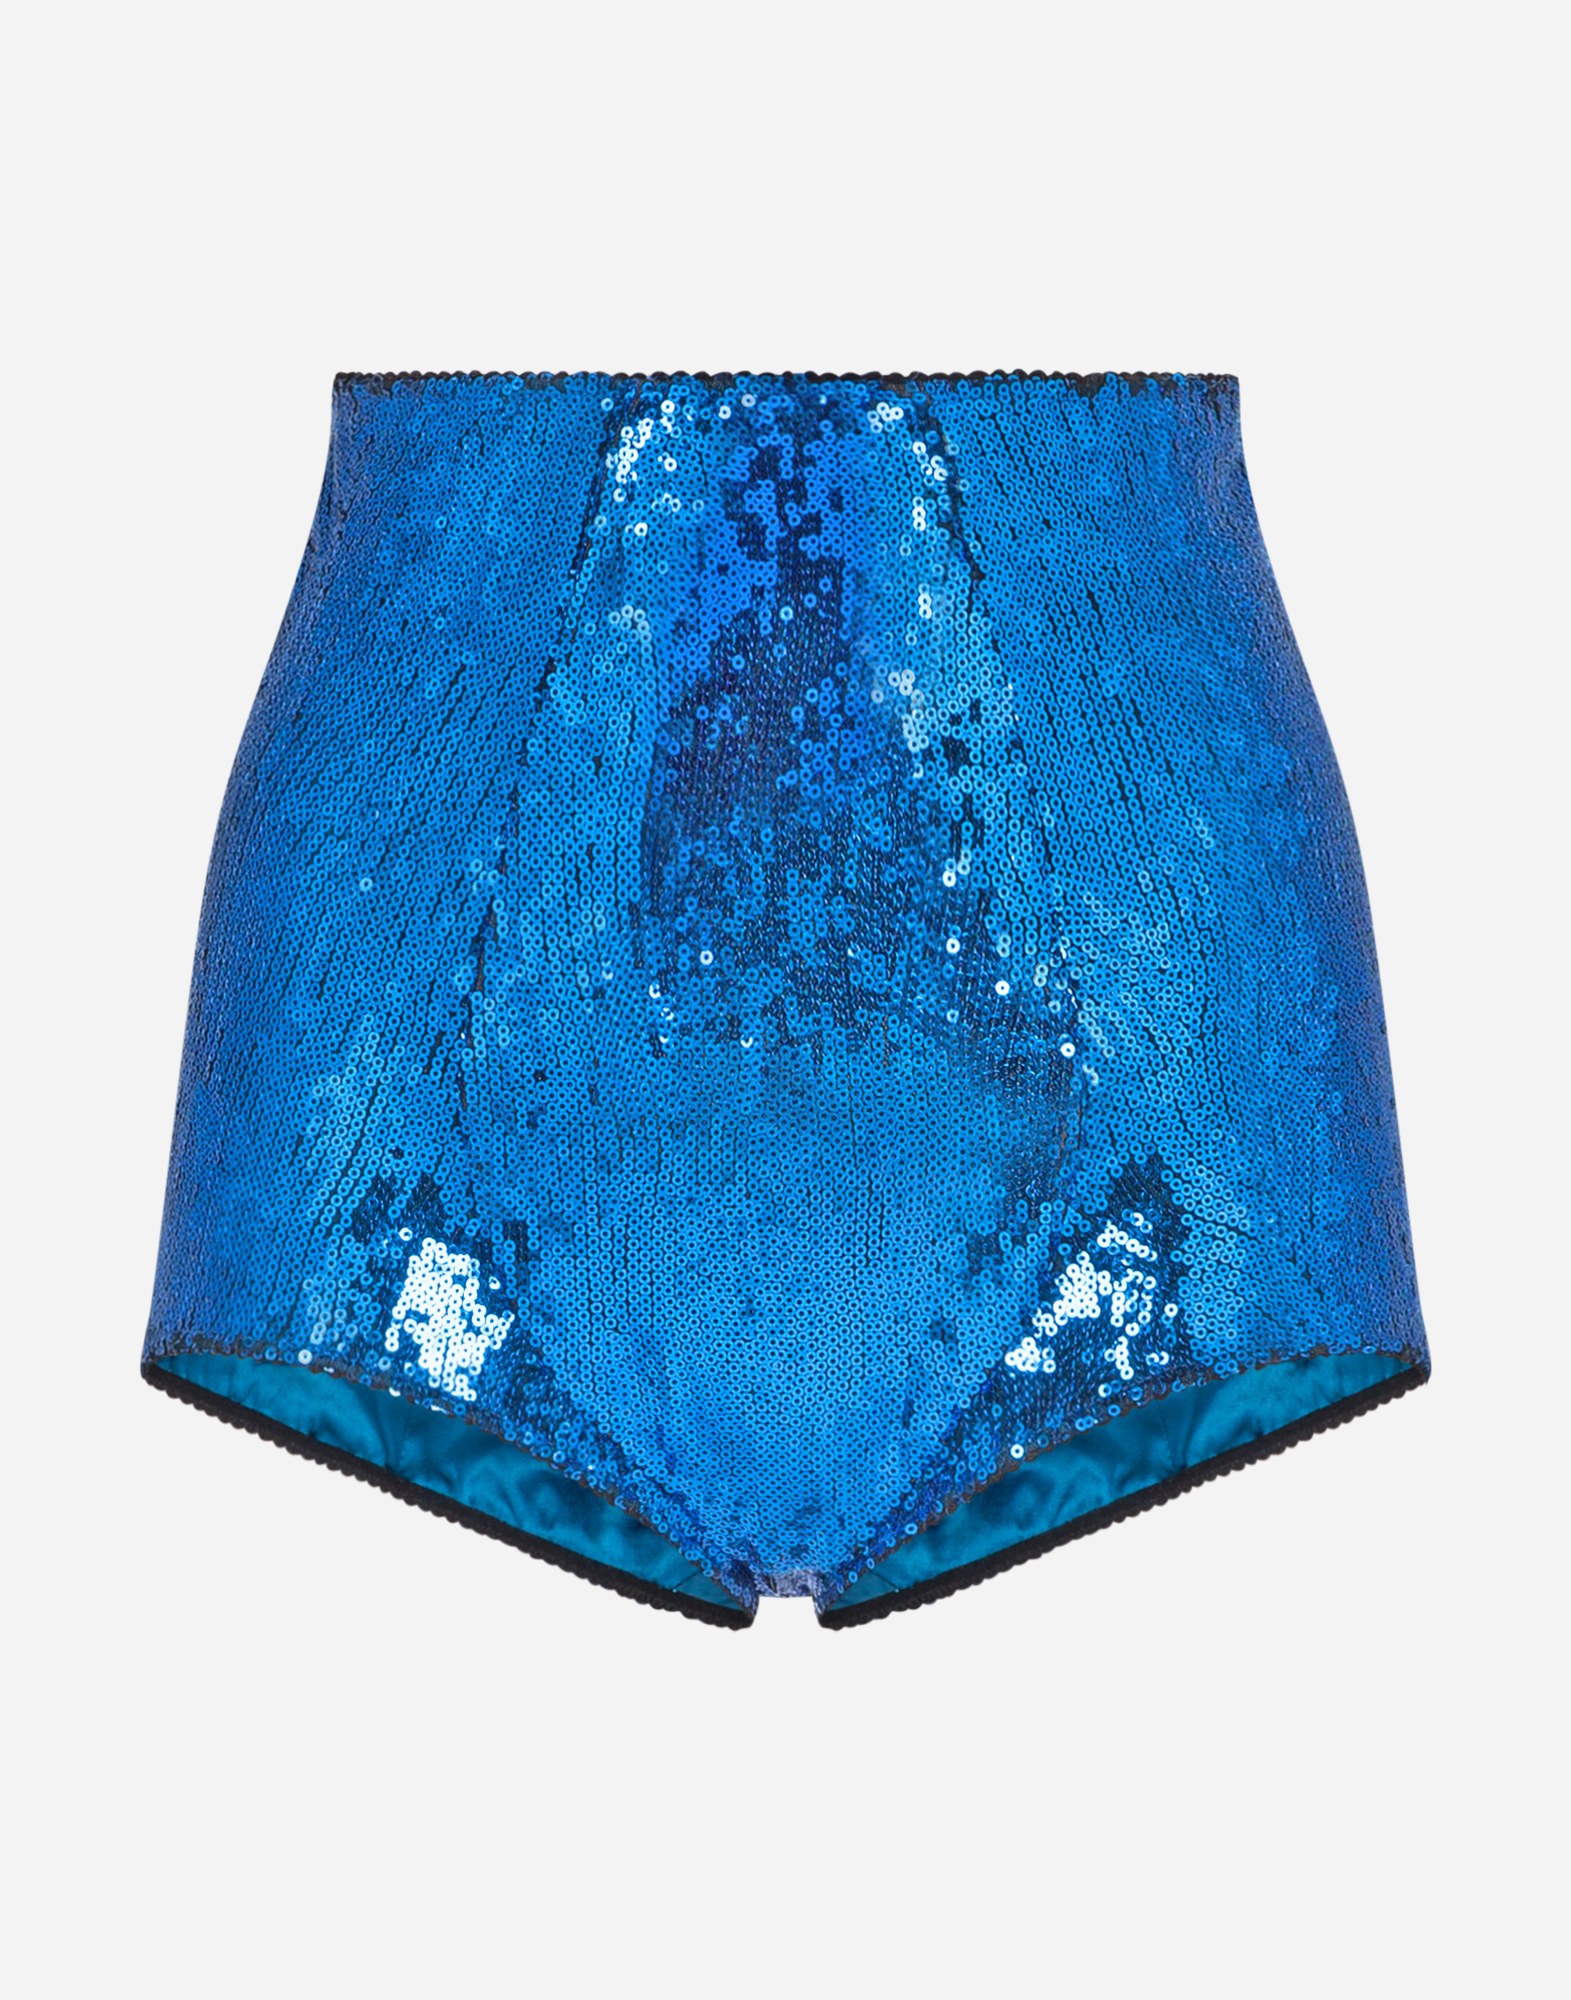 Sequined high-waisted panties in Turquoise